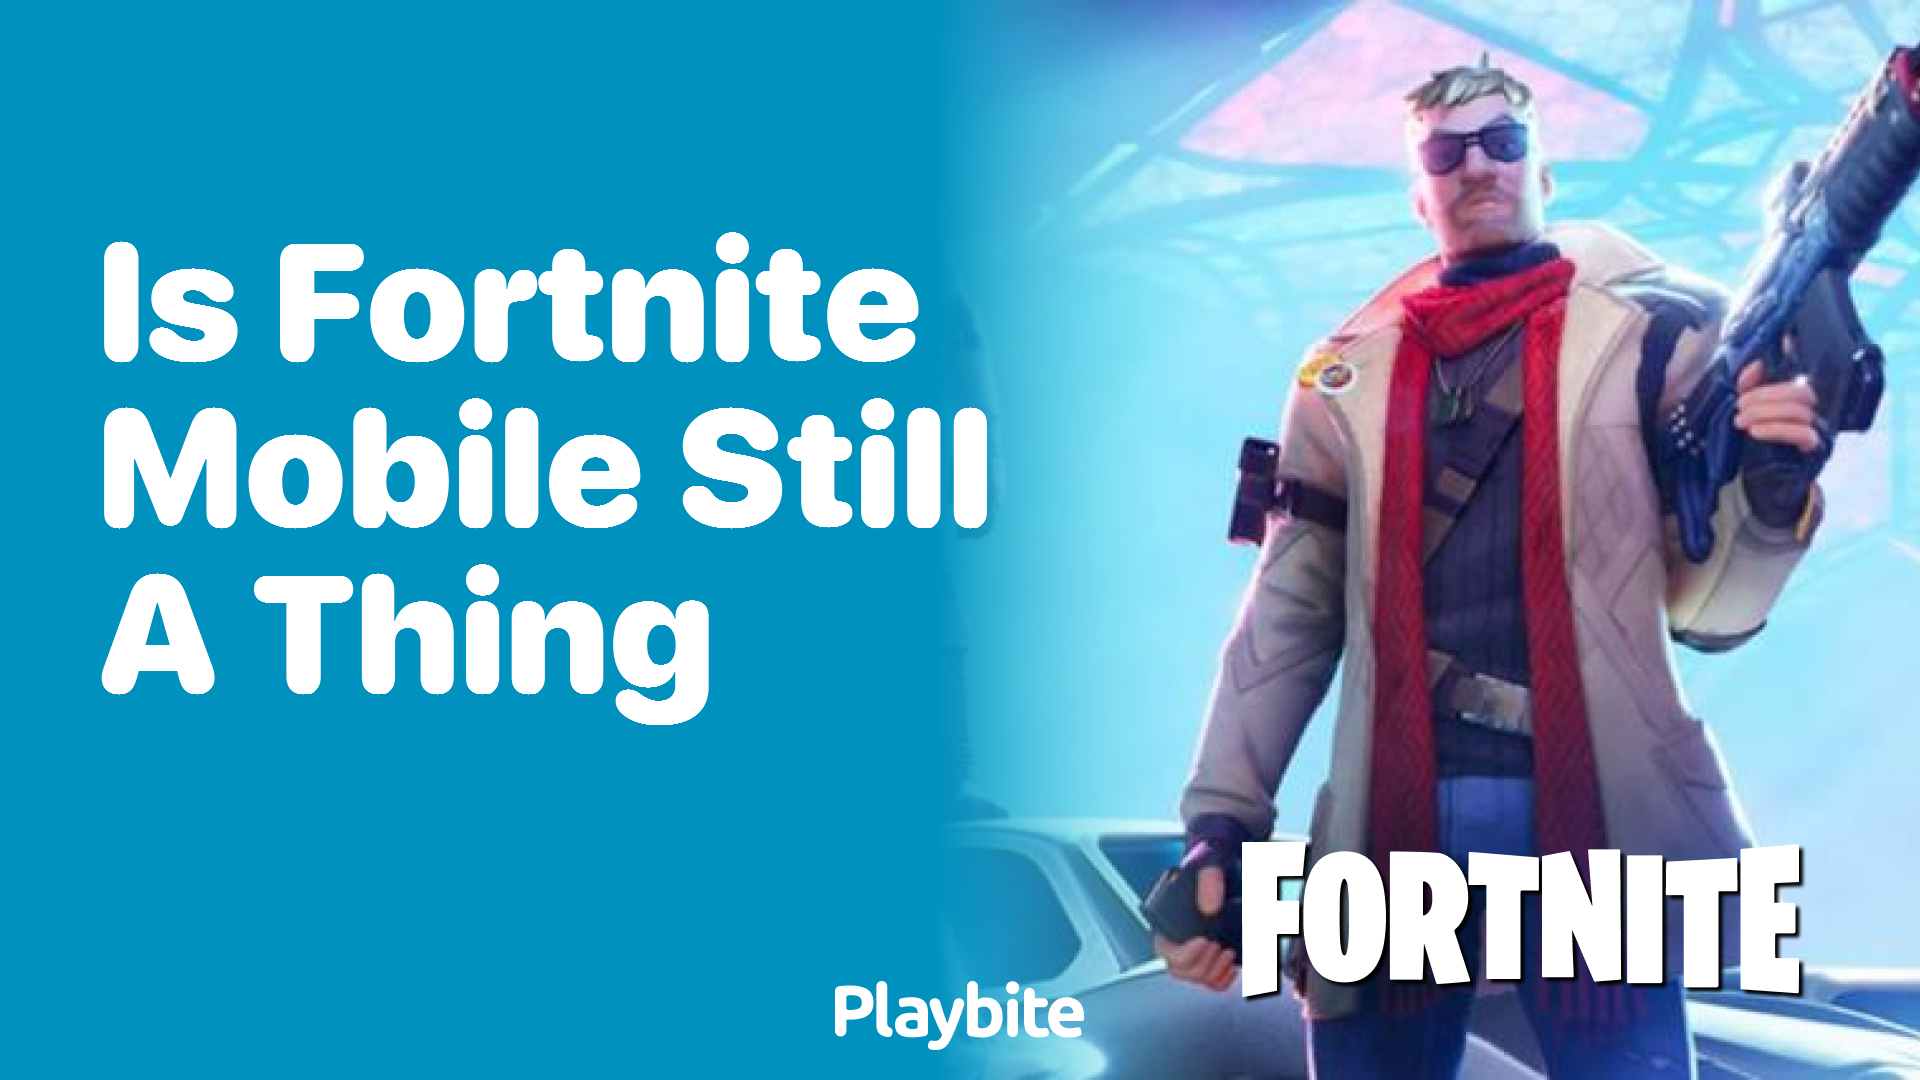 Is Fortnite Mobile Still a Thing?